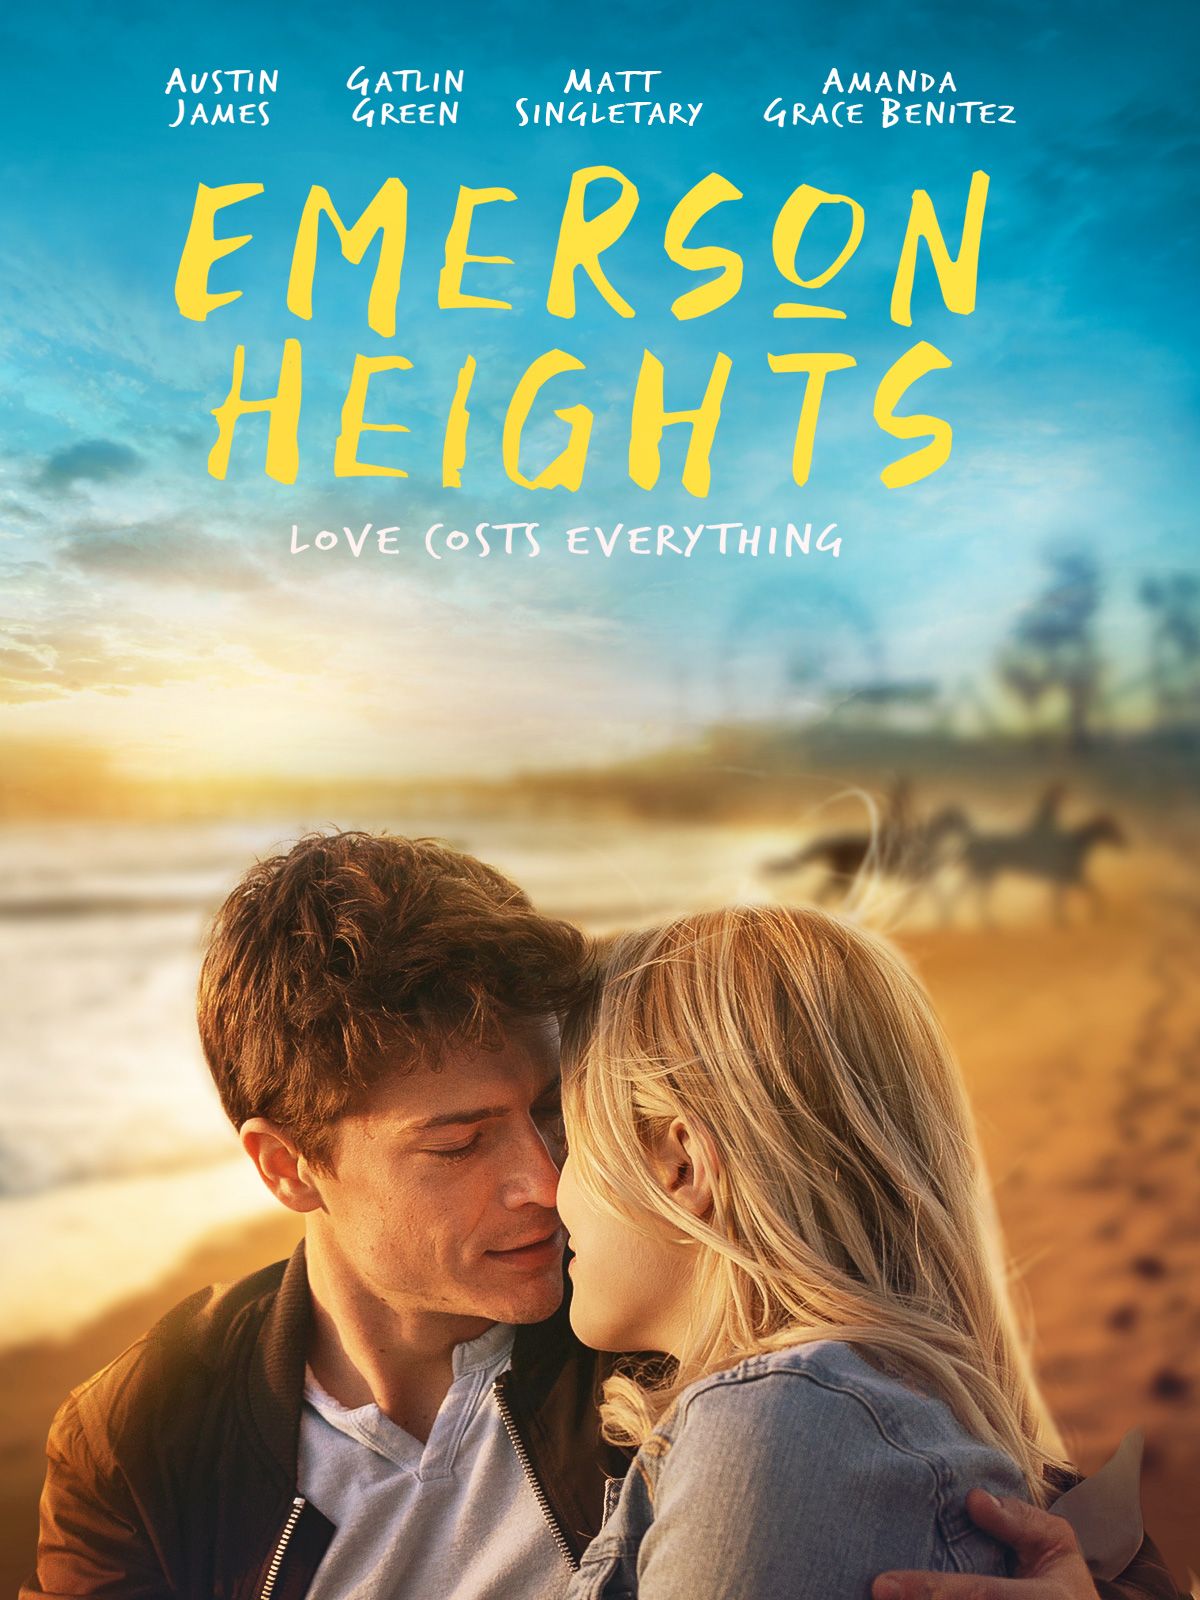 Keyart for the movie Emerson Heights